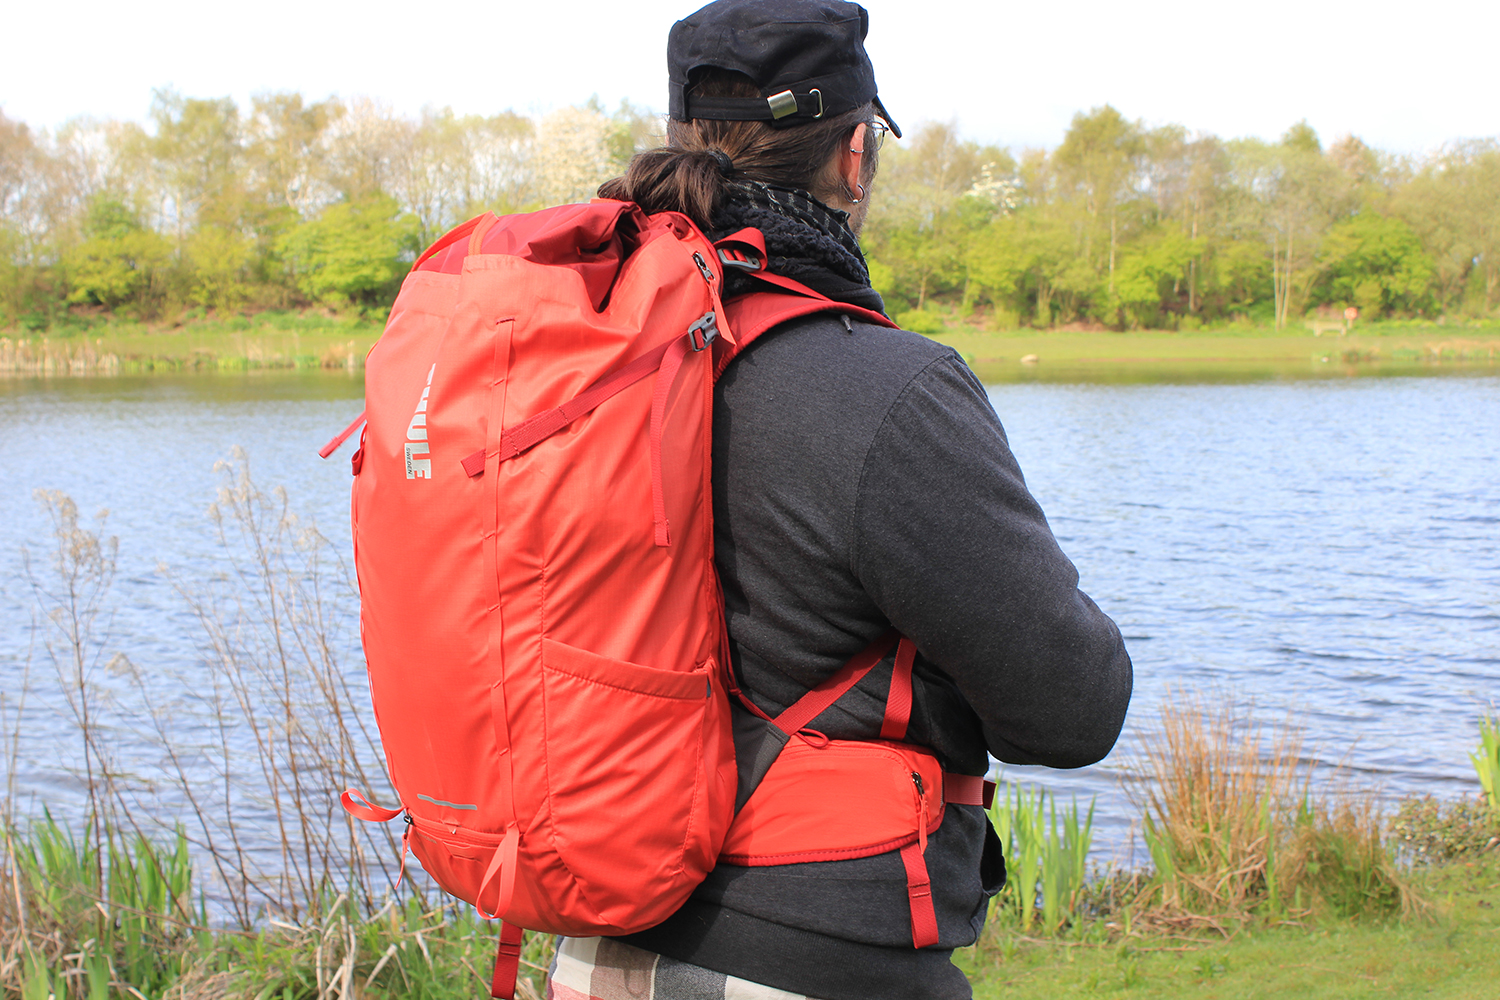 thule-backpack-review-35litre-stir-06